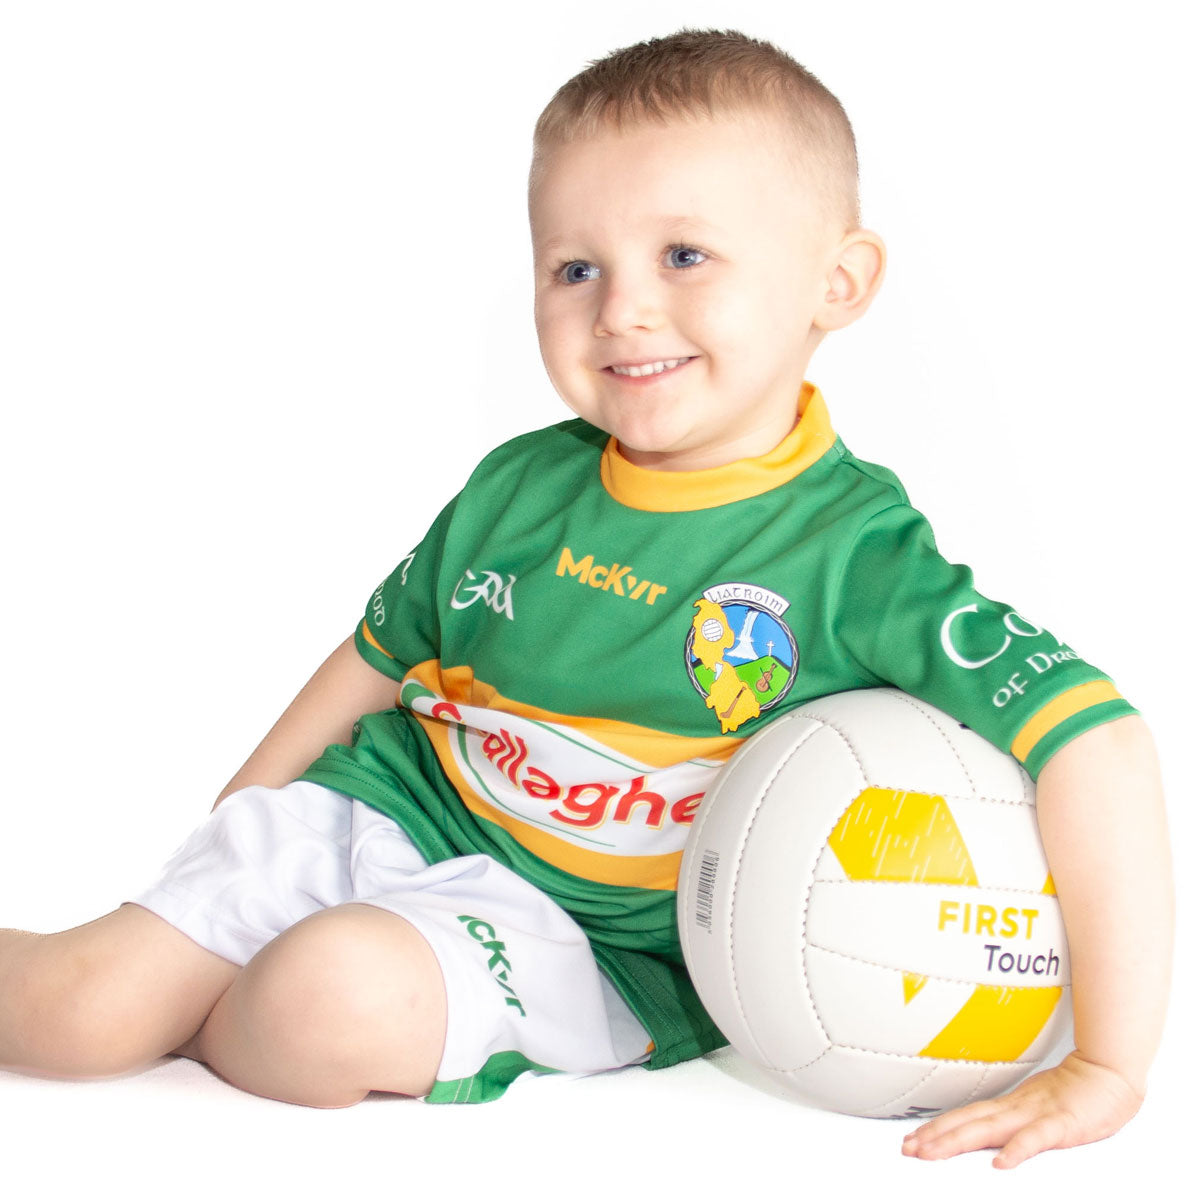 Mc Keever Go First Touch Gaelic Football